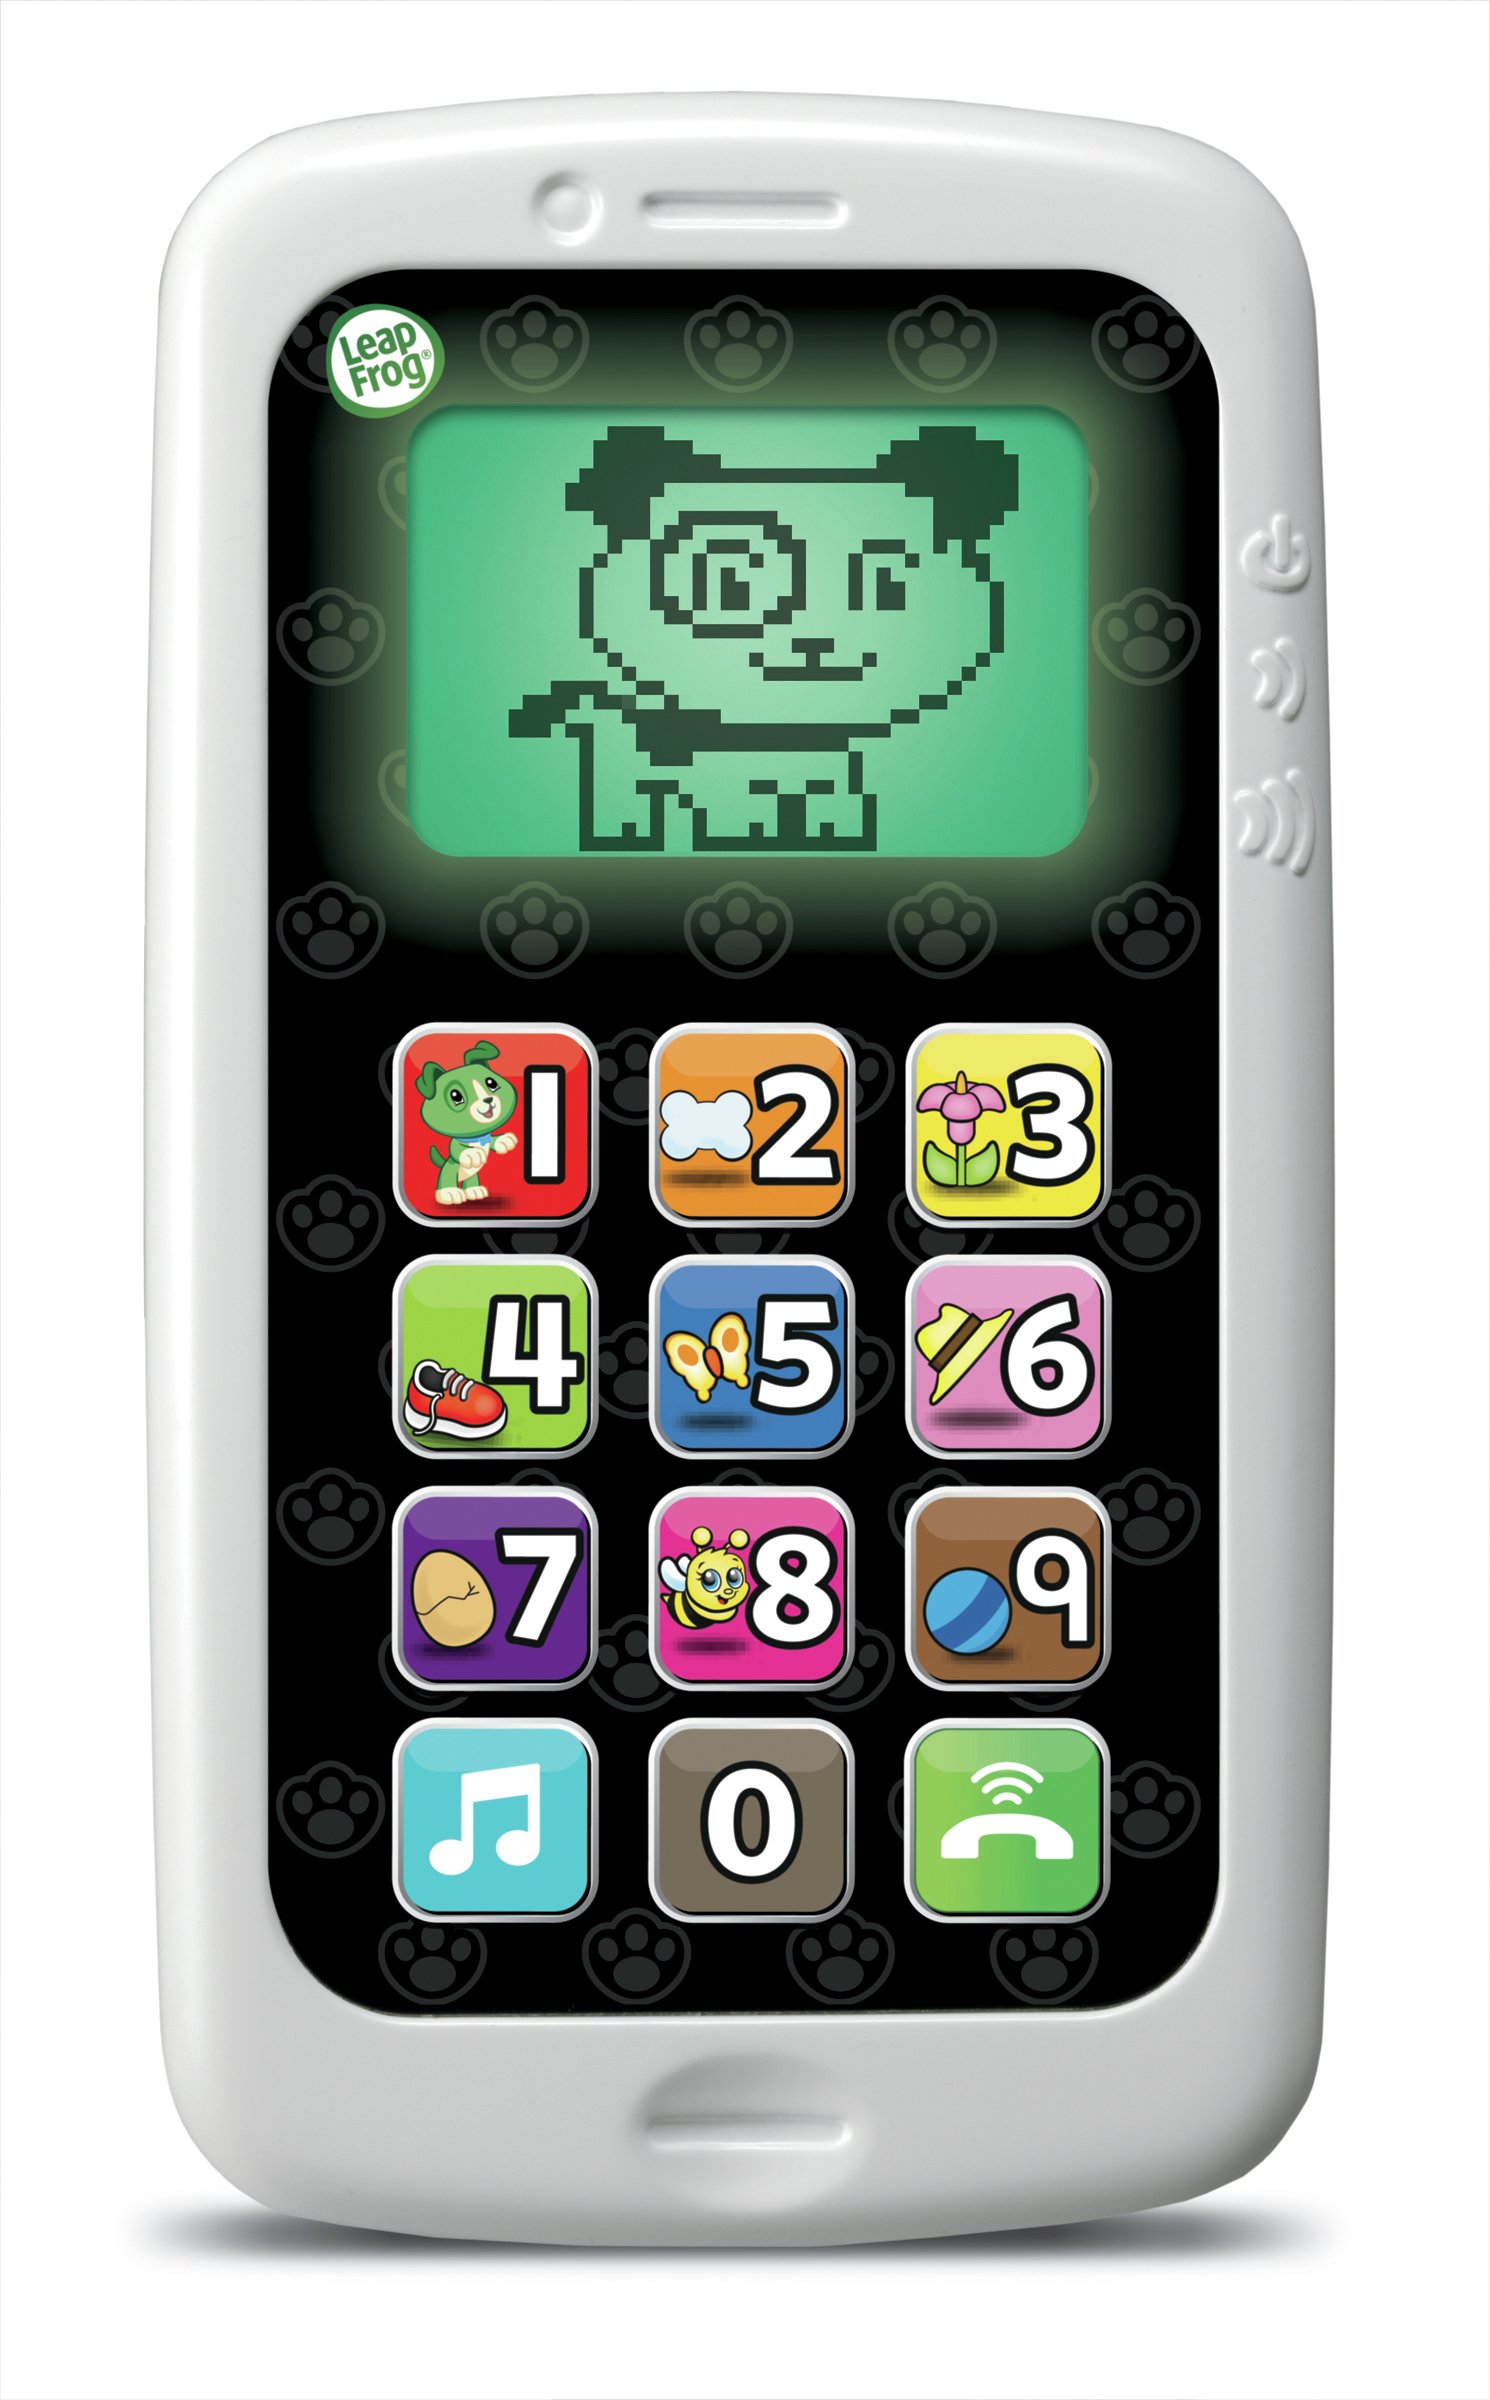 Leapfrog Chat and Count Smart Phone.